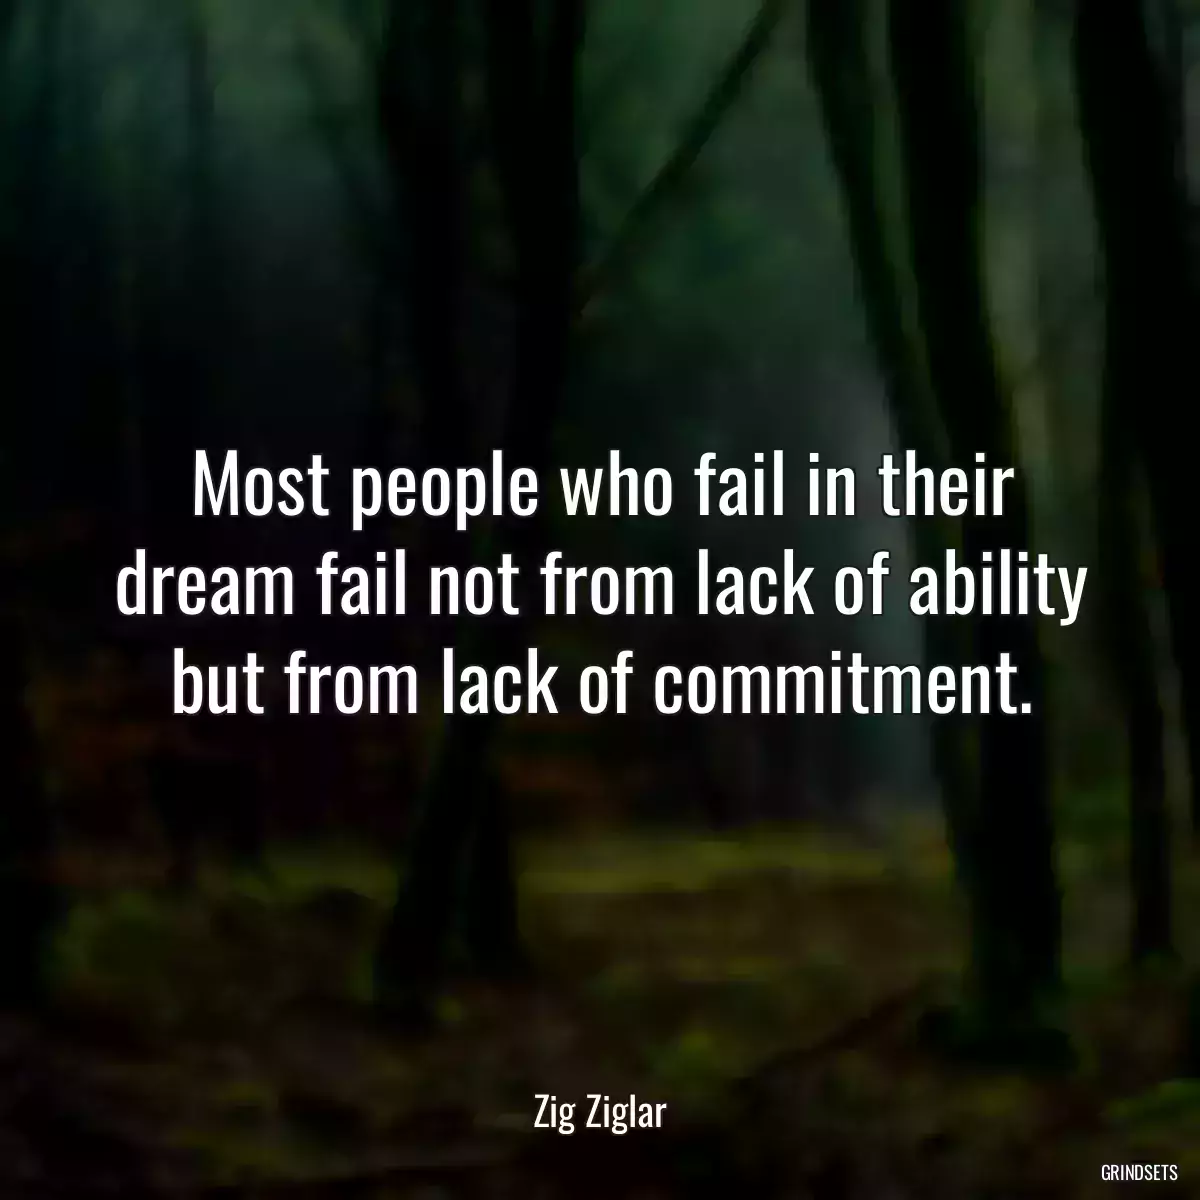 Most people who fail in their dream fail not from lack of ability but from lack of commitment.